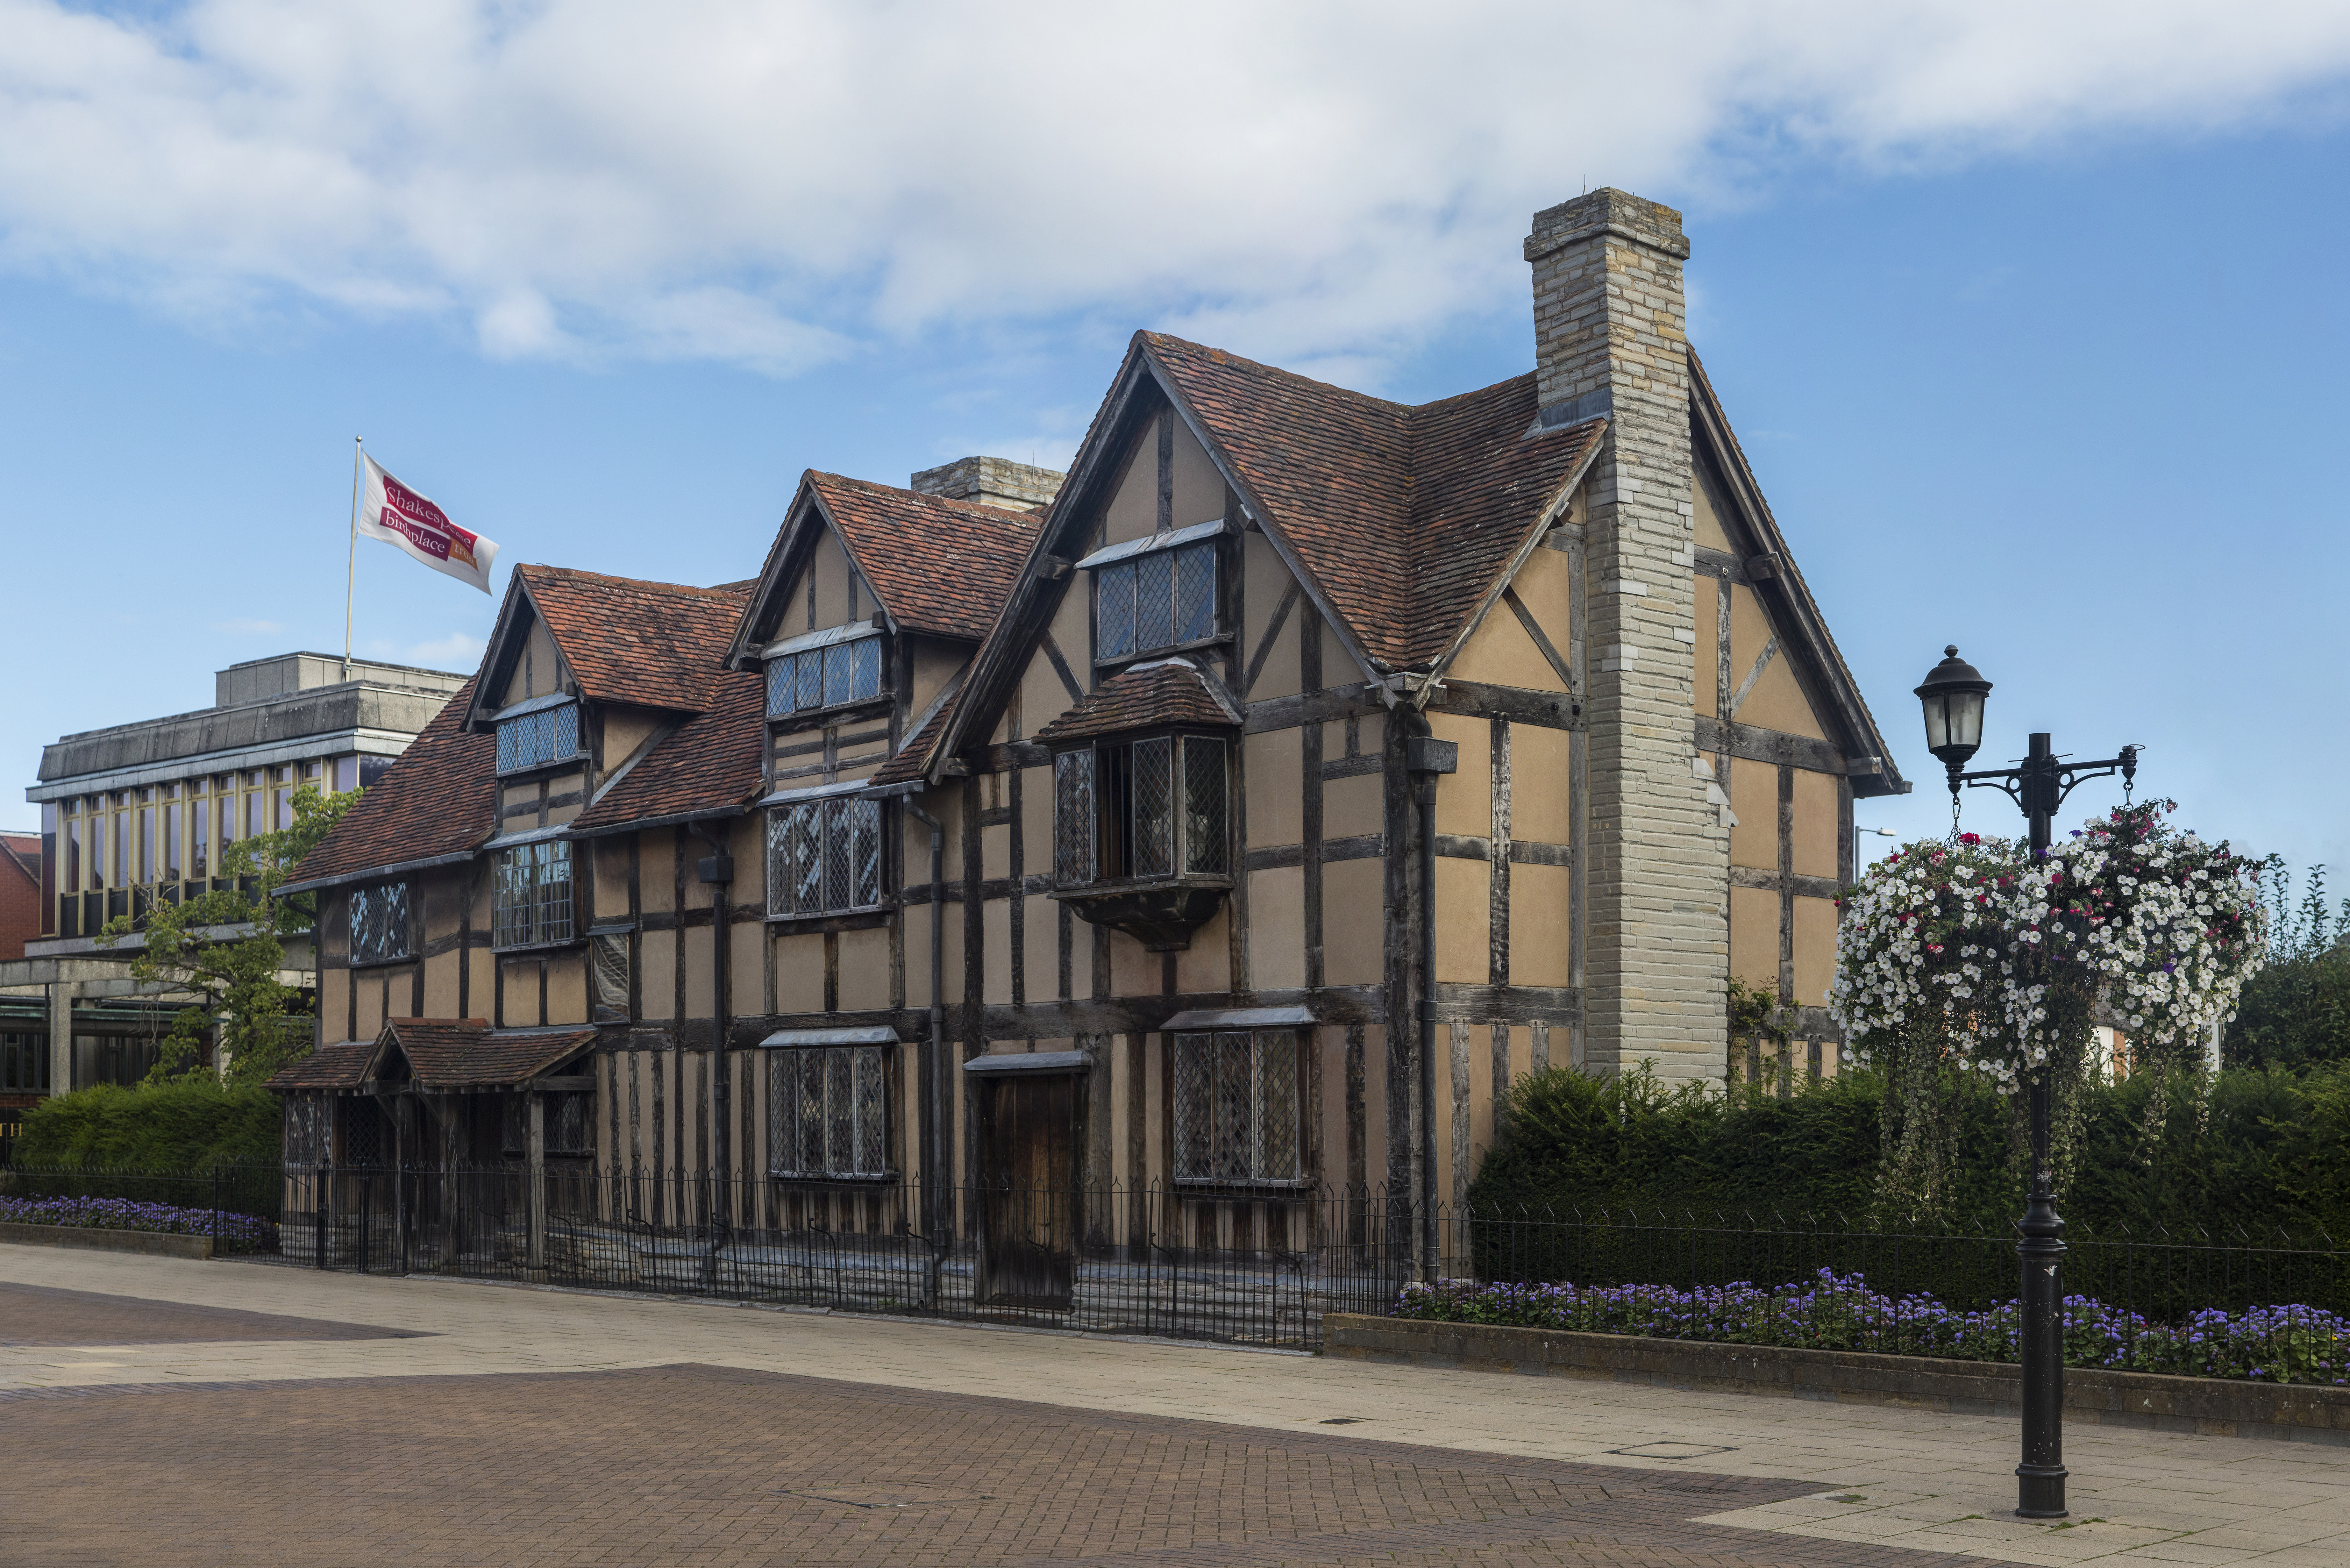 5. ​Literary Journey: Following in the Footsteps of Literary Greats in Stratford-upon-Avon